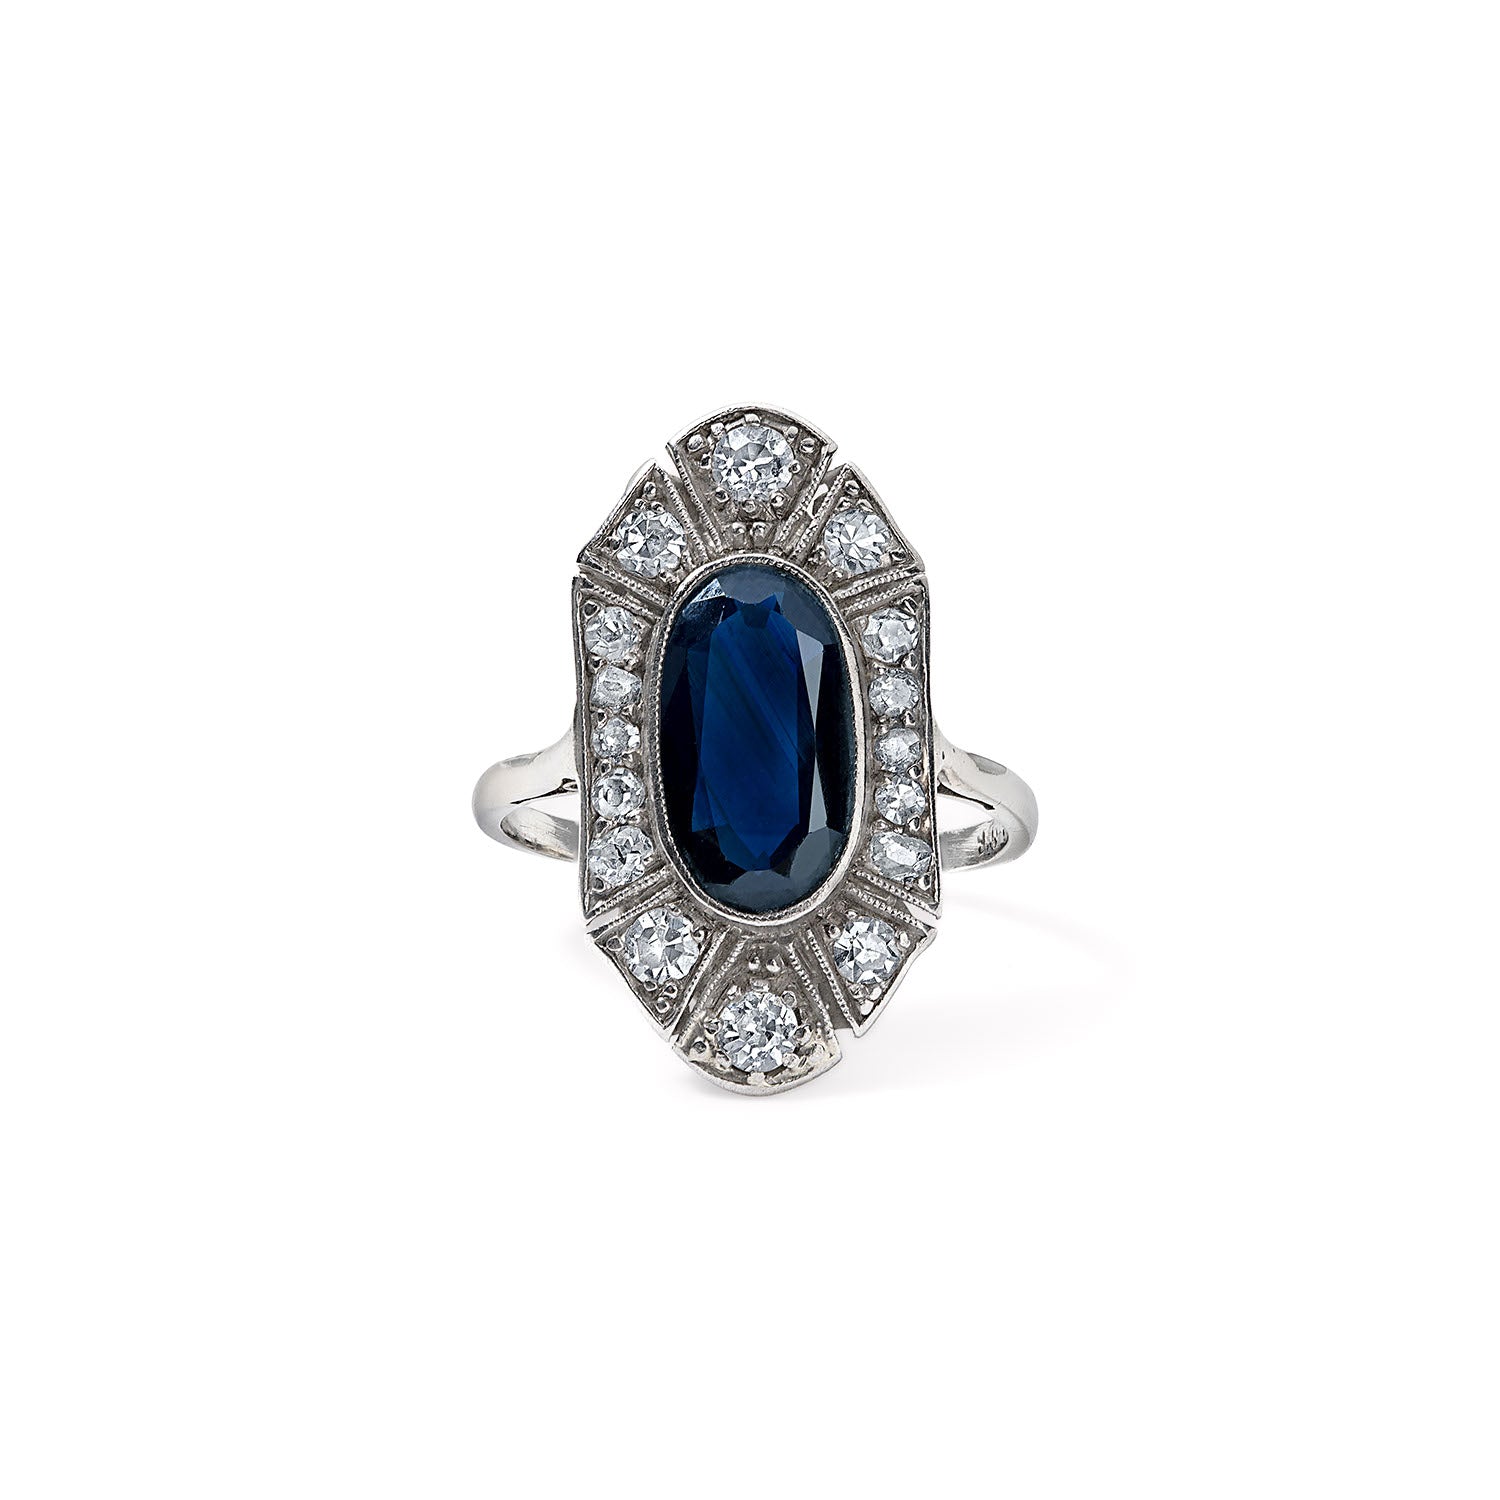 Vintage Elongated Oval Sapphire and Diamond Ring